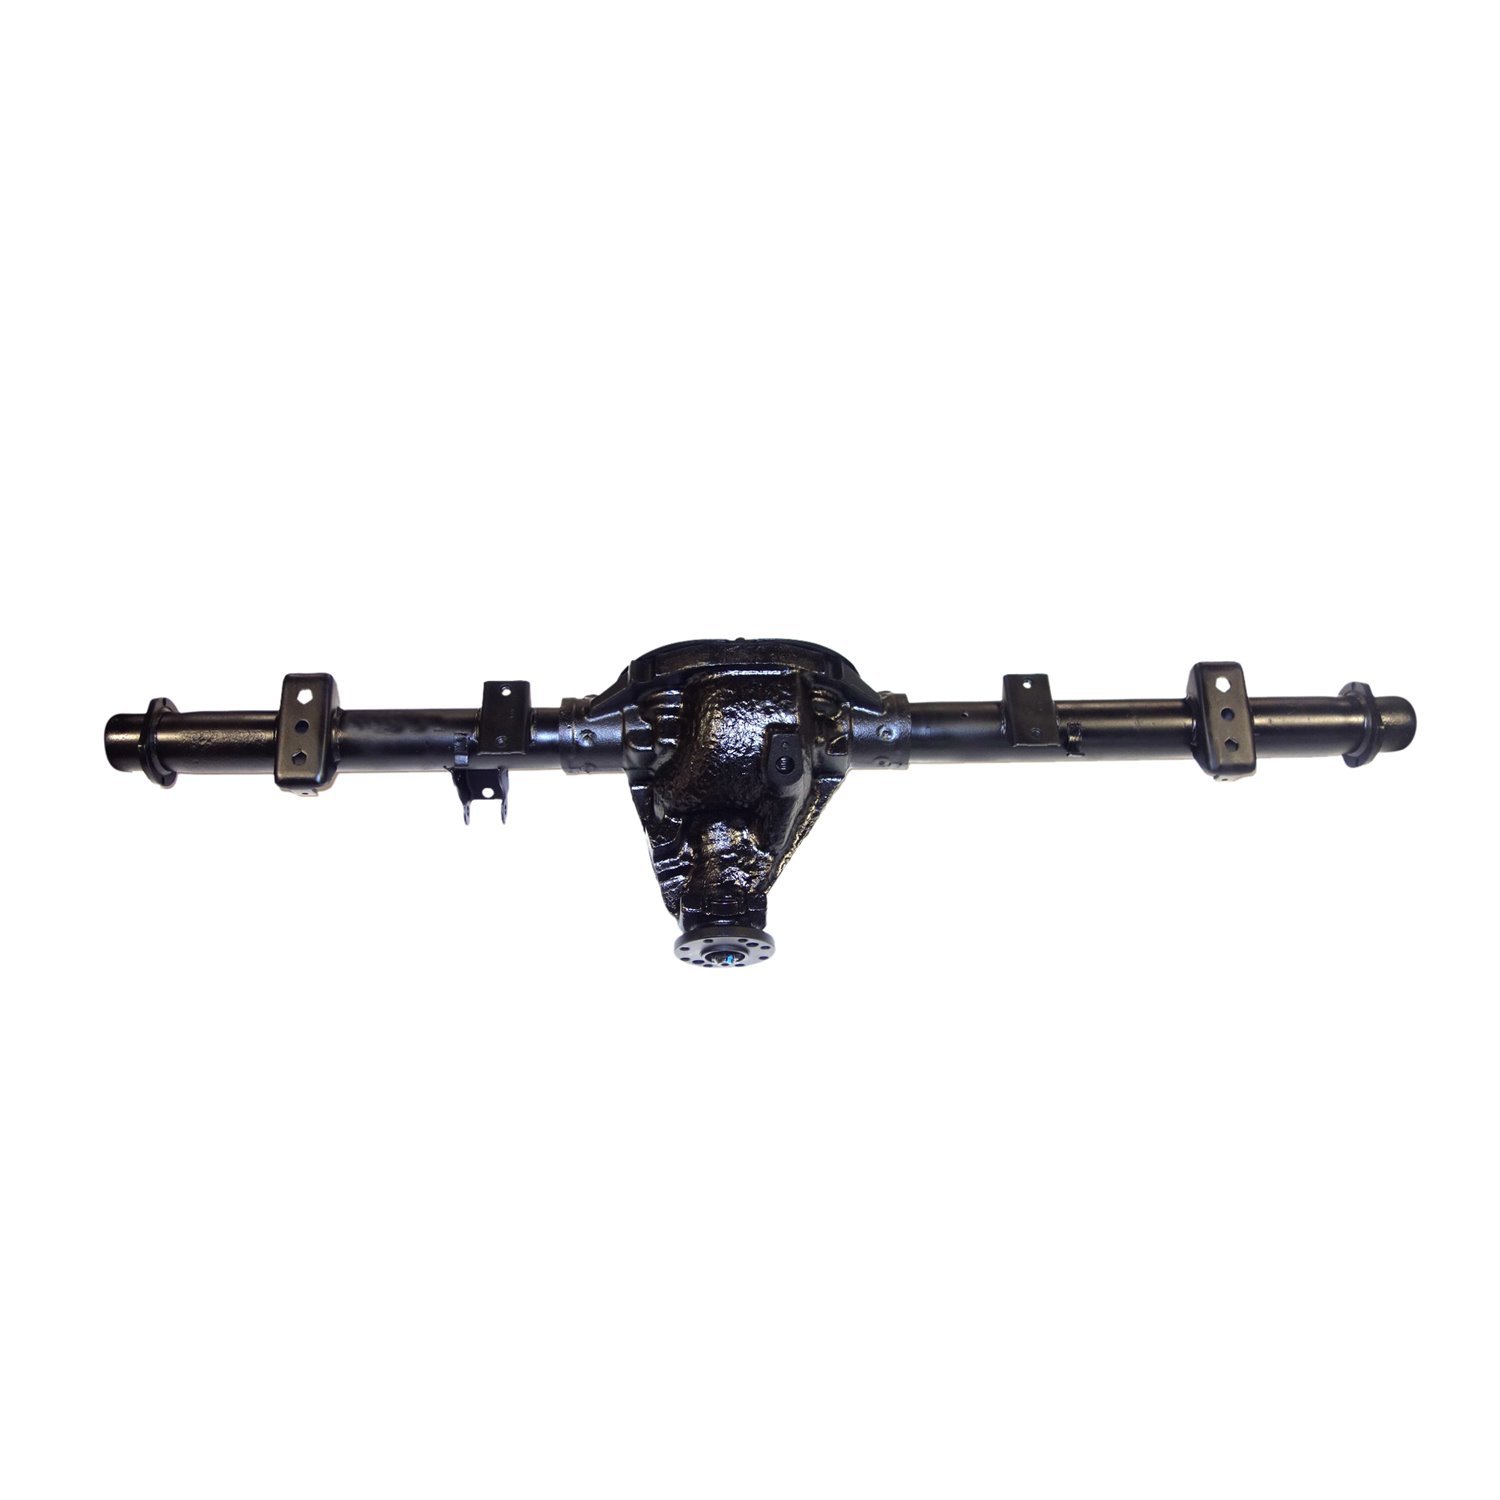 Remanufactured Complete Axle Assembly for Chrysler 8.25" 07-09 Aspen & Durango 3.92 Ratio